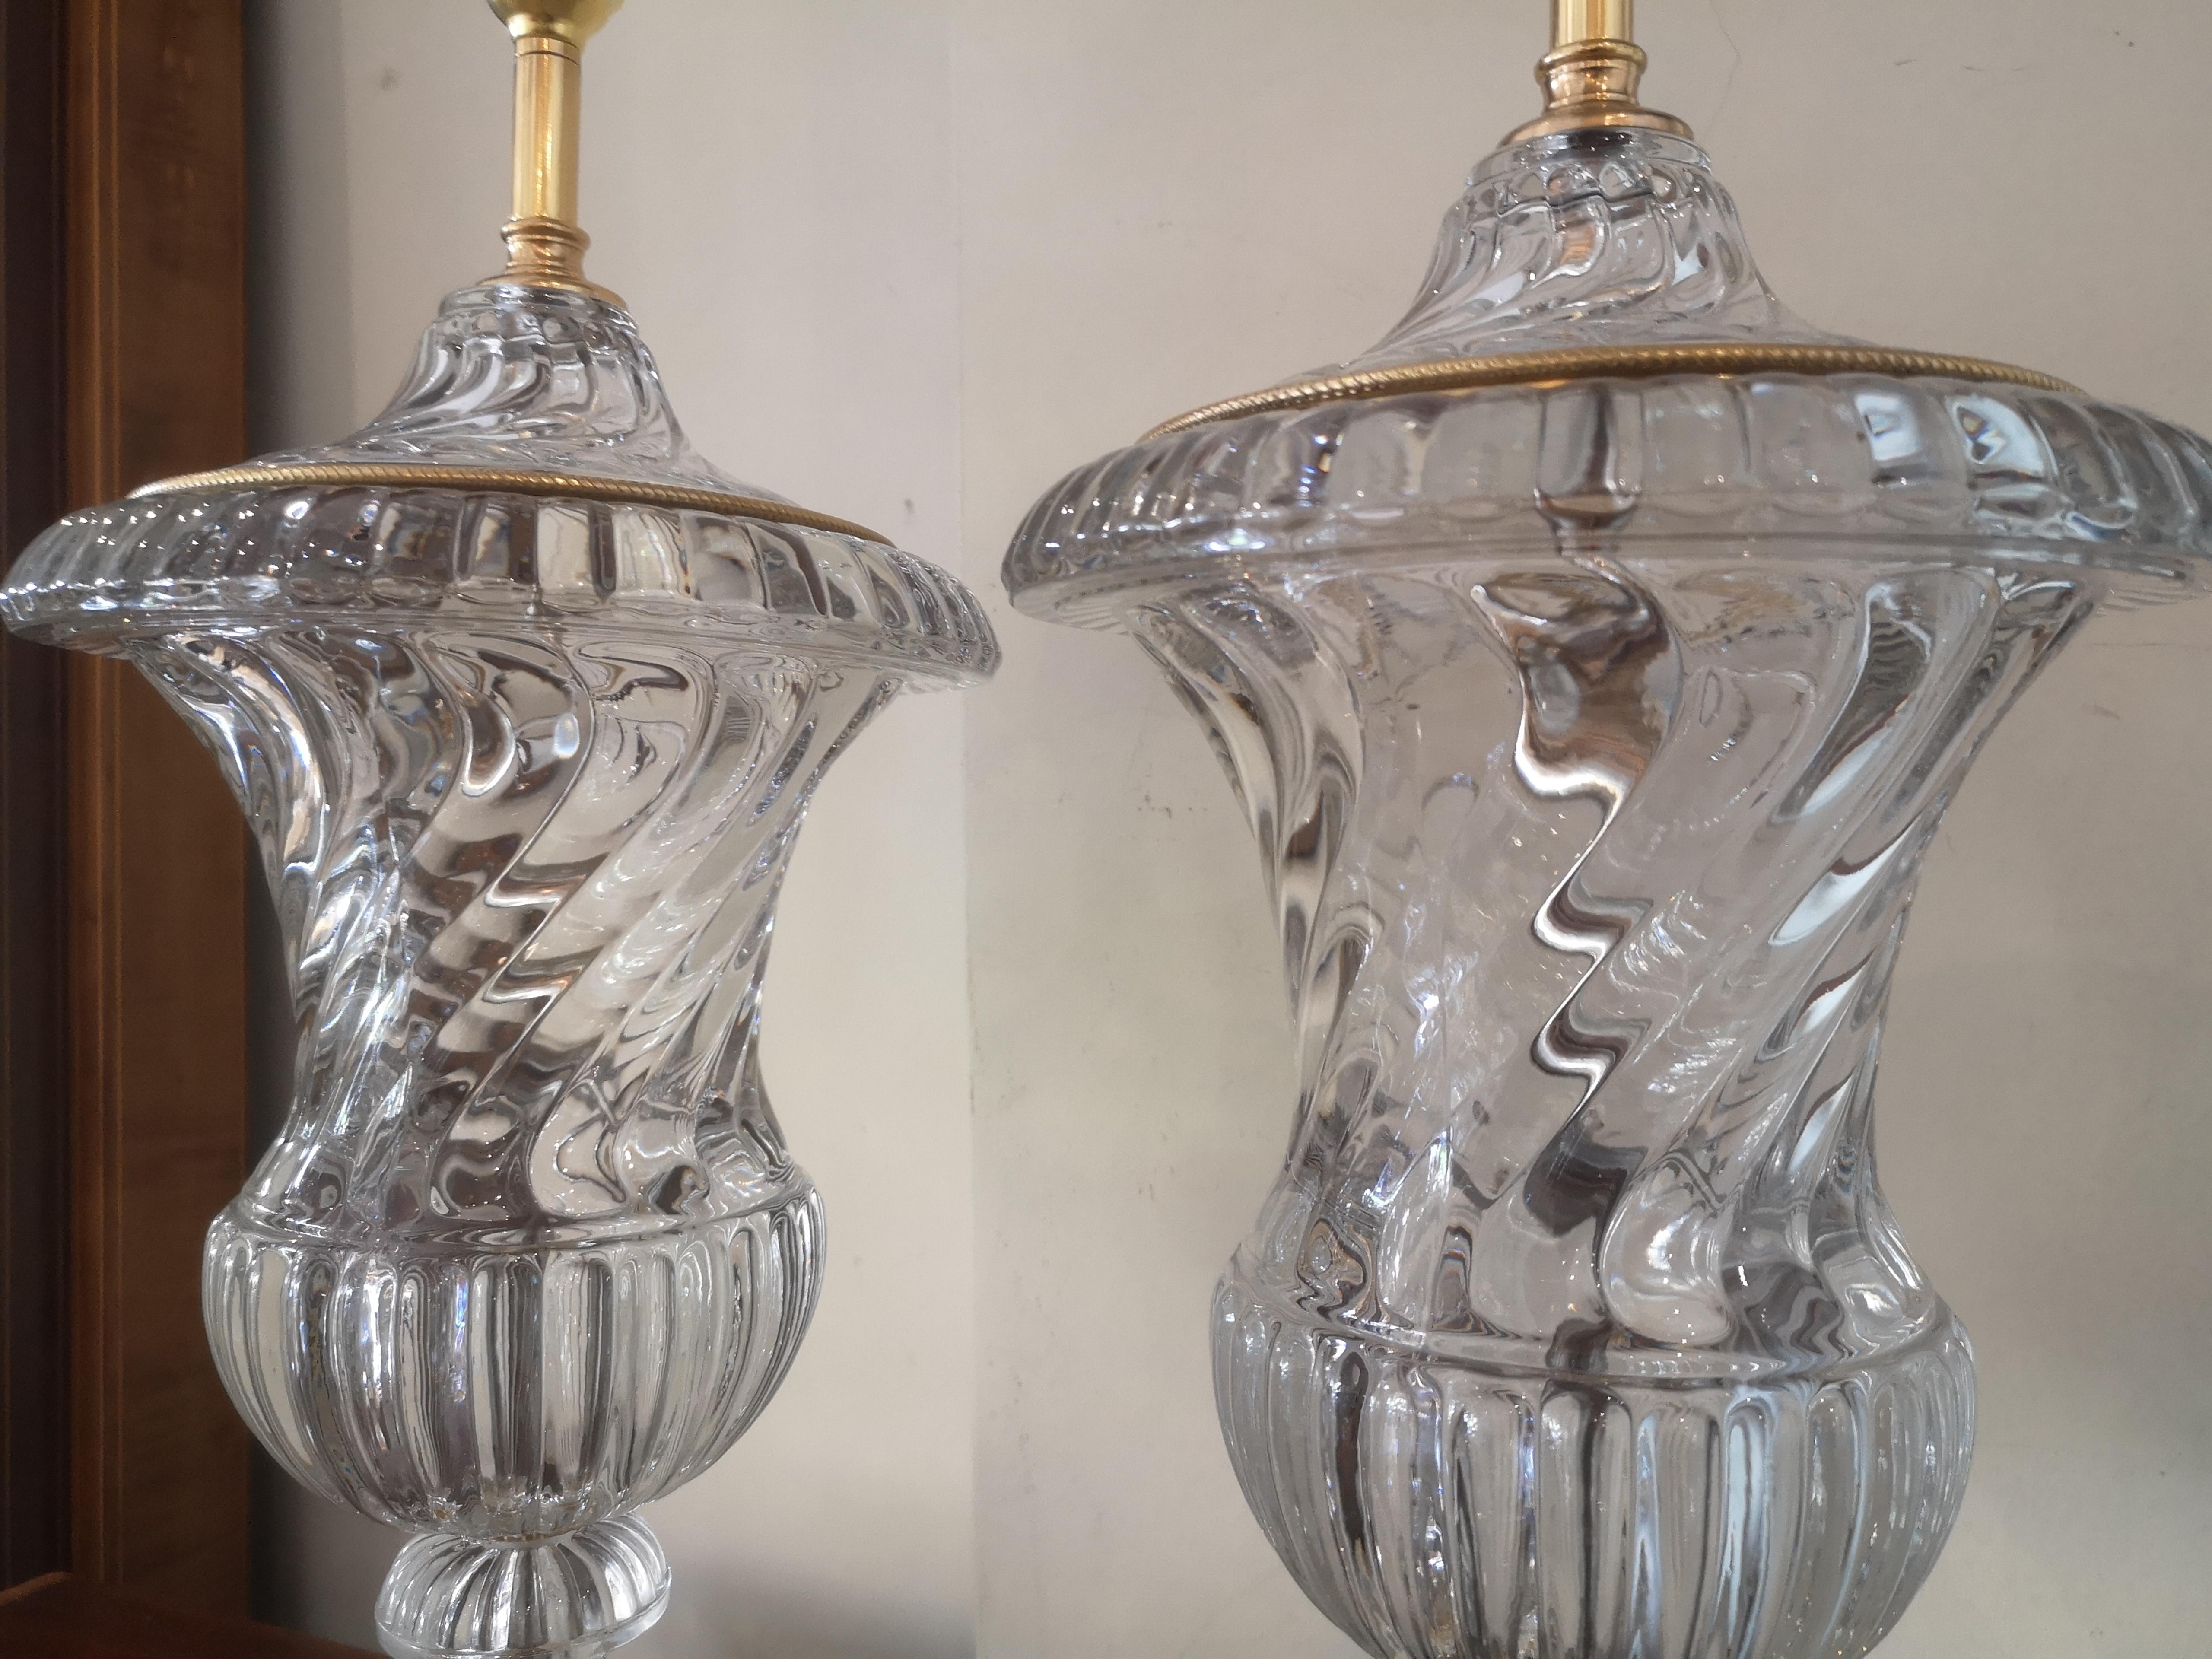 A pair of early 20th century French Baccarat style lamps, with swirling urn shaped crystal bodies and bronze banding.
Recently re-wired.
French, circa 1920.